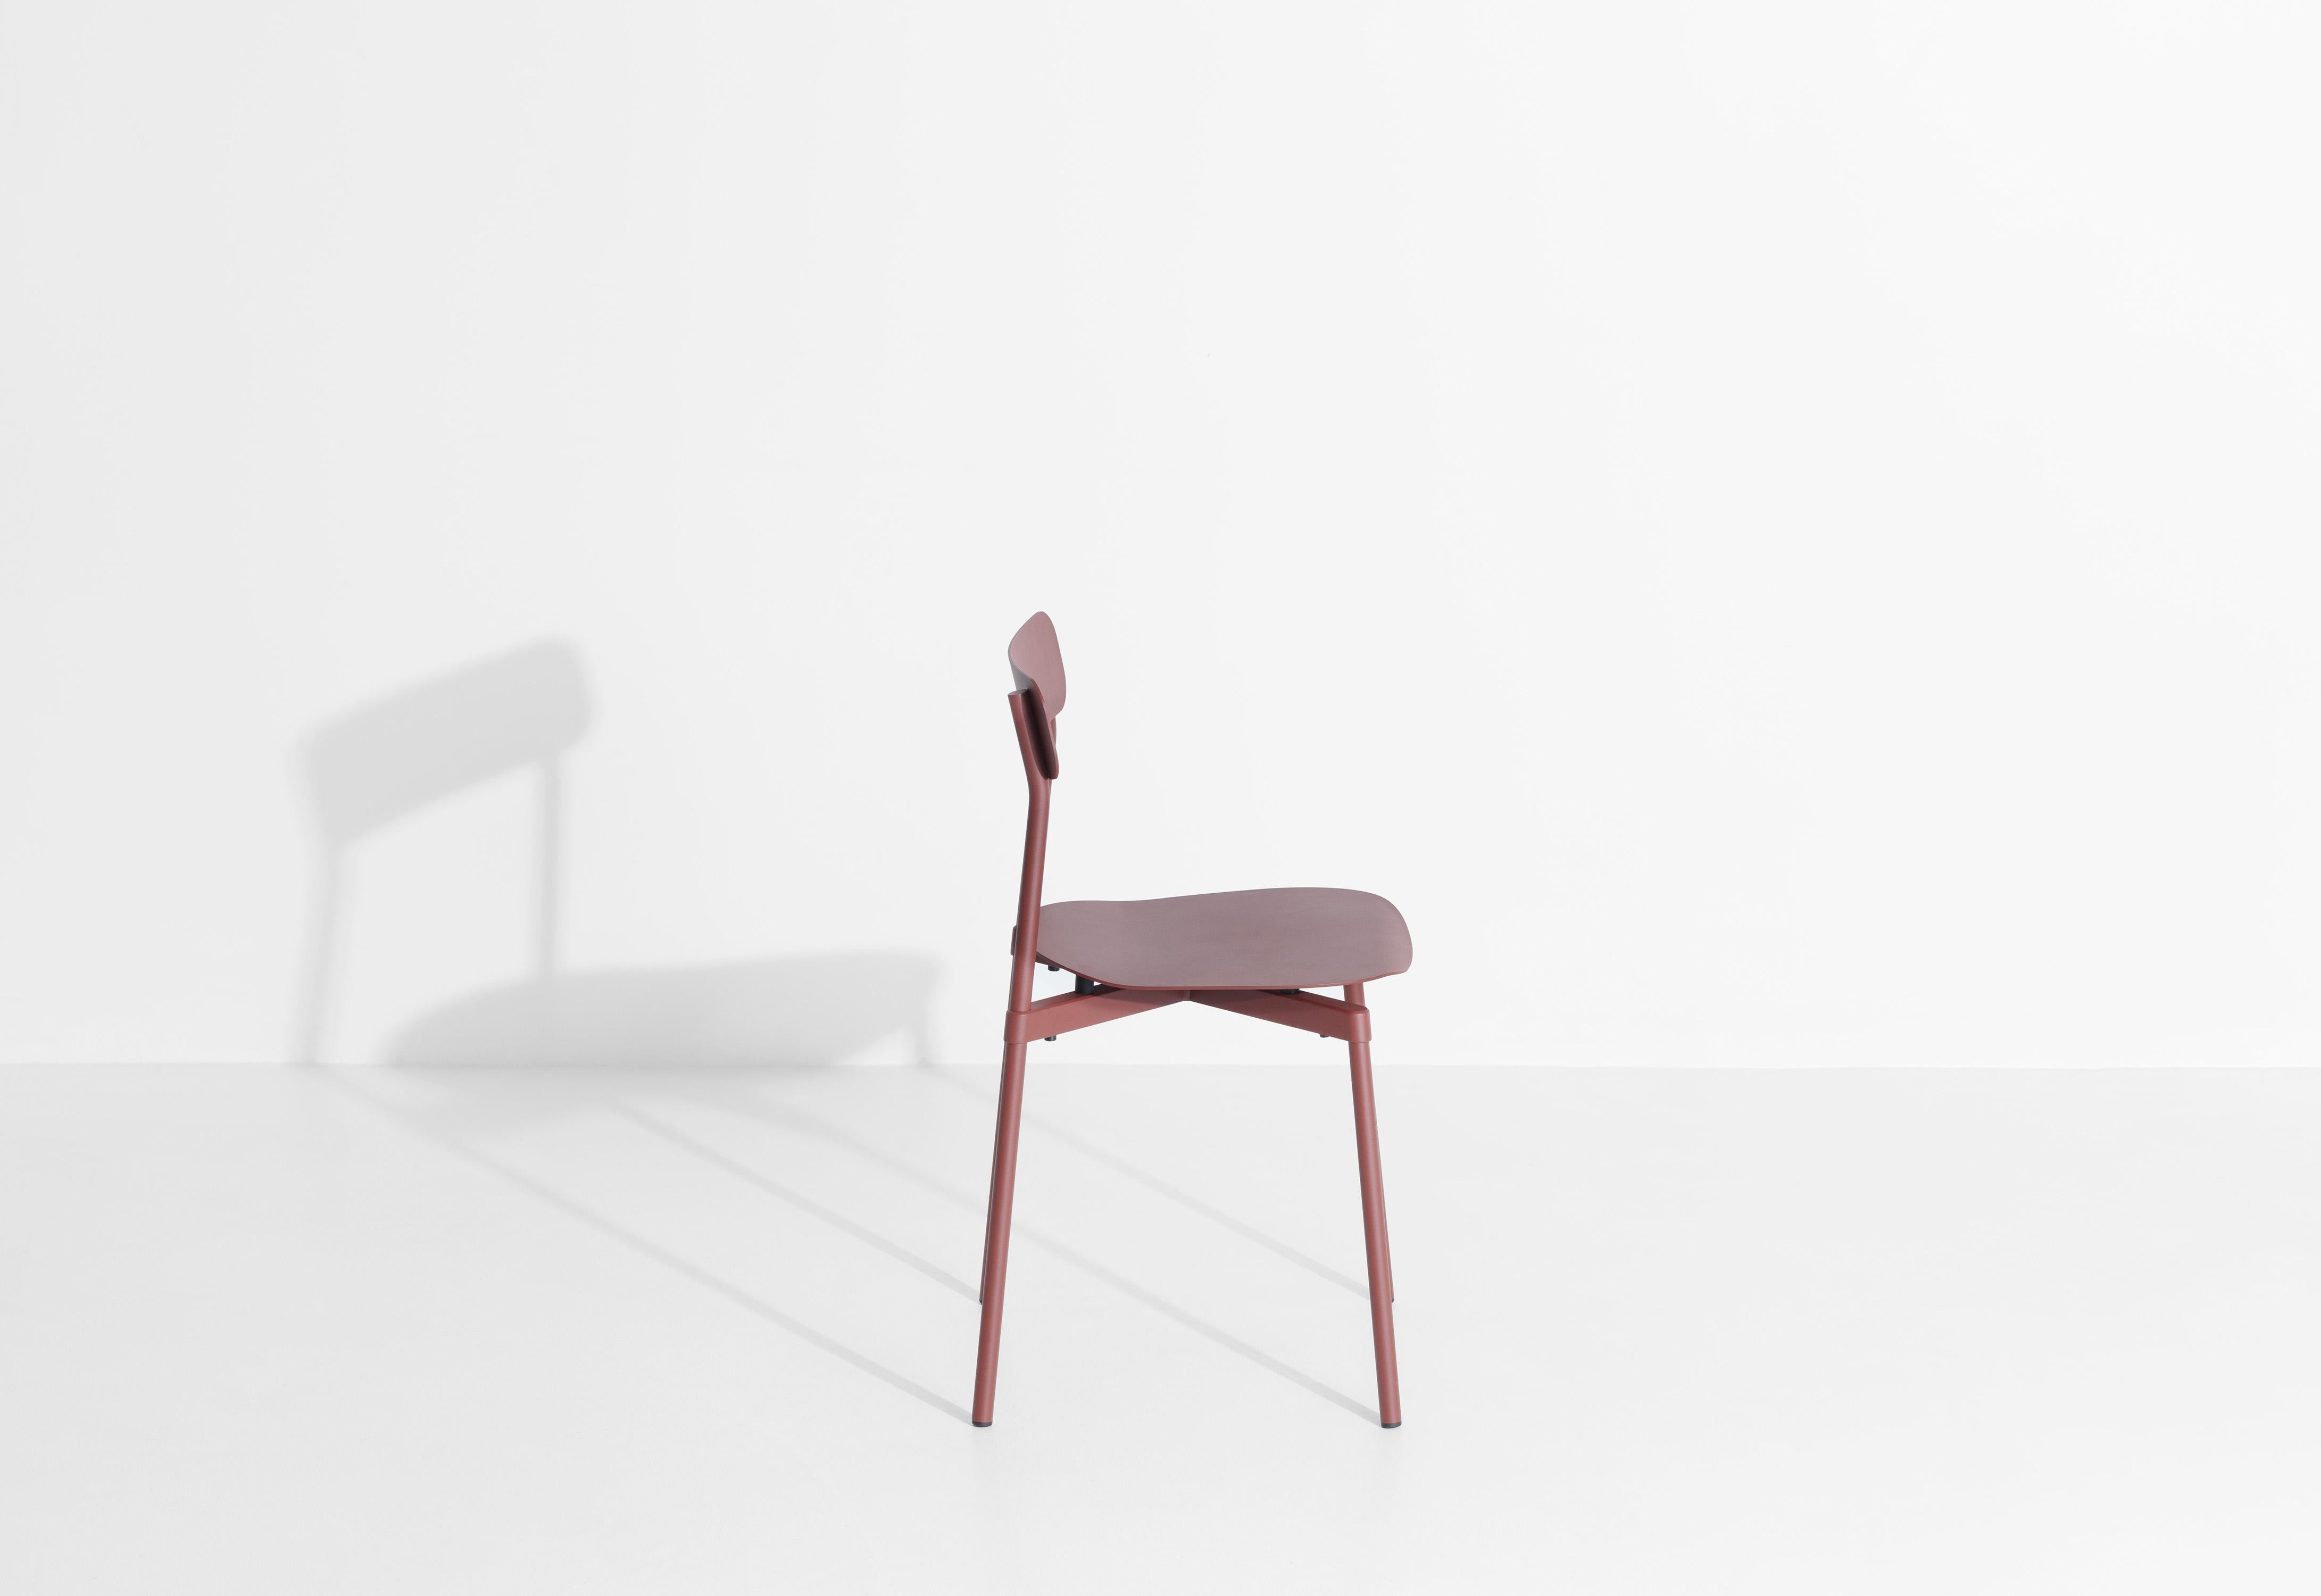 Petite Friture Fromme Chair in Brown-Red Aluminium by Tom Chung, 2019 In New Condition For Sale In Brooklyn, NY